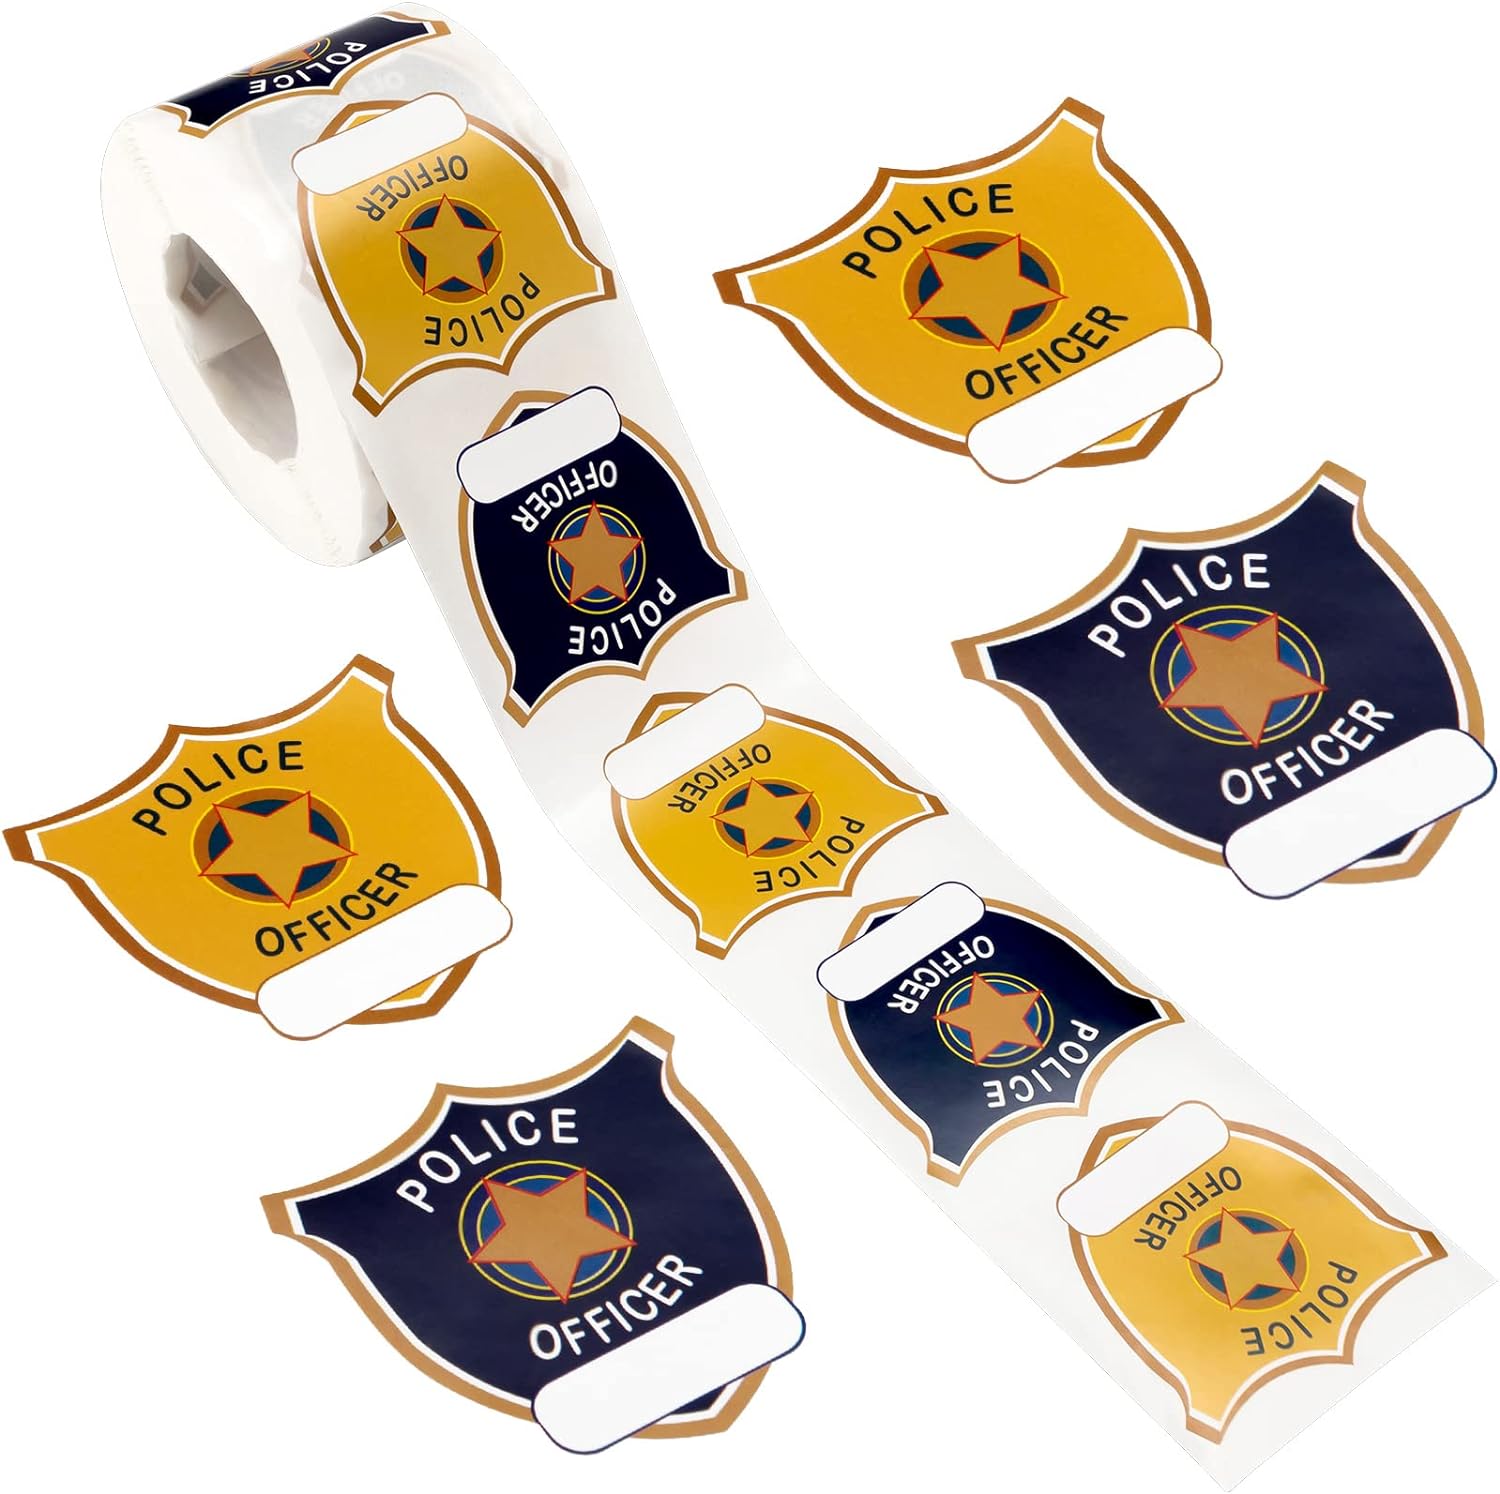 600 Pieces Police Stickers for Kids Police Birthday Party Supplies